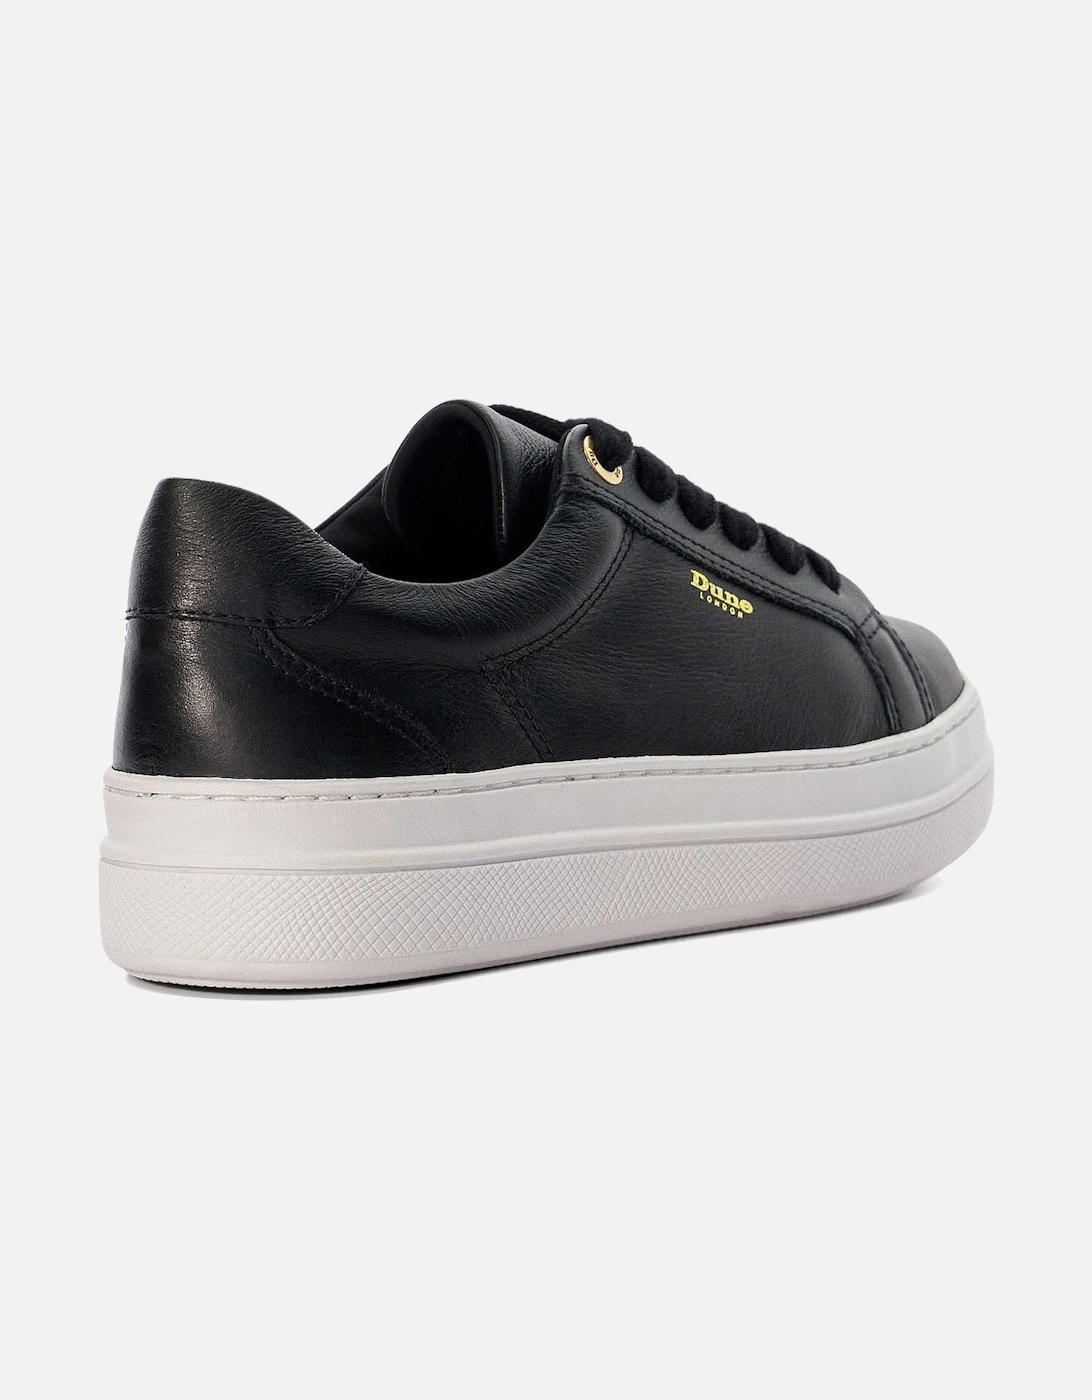 Ladies Eastern - Branded Chunky Cup Sole Trainers